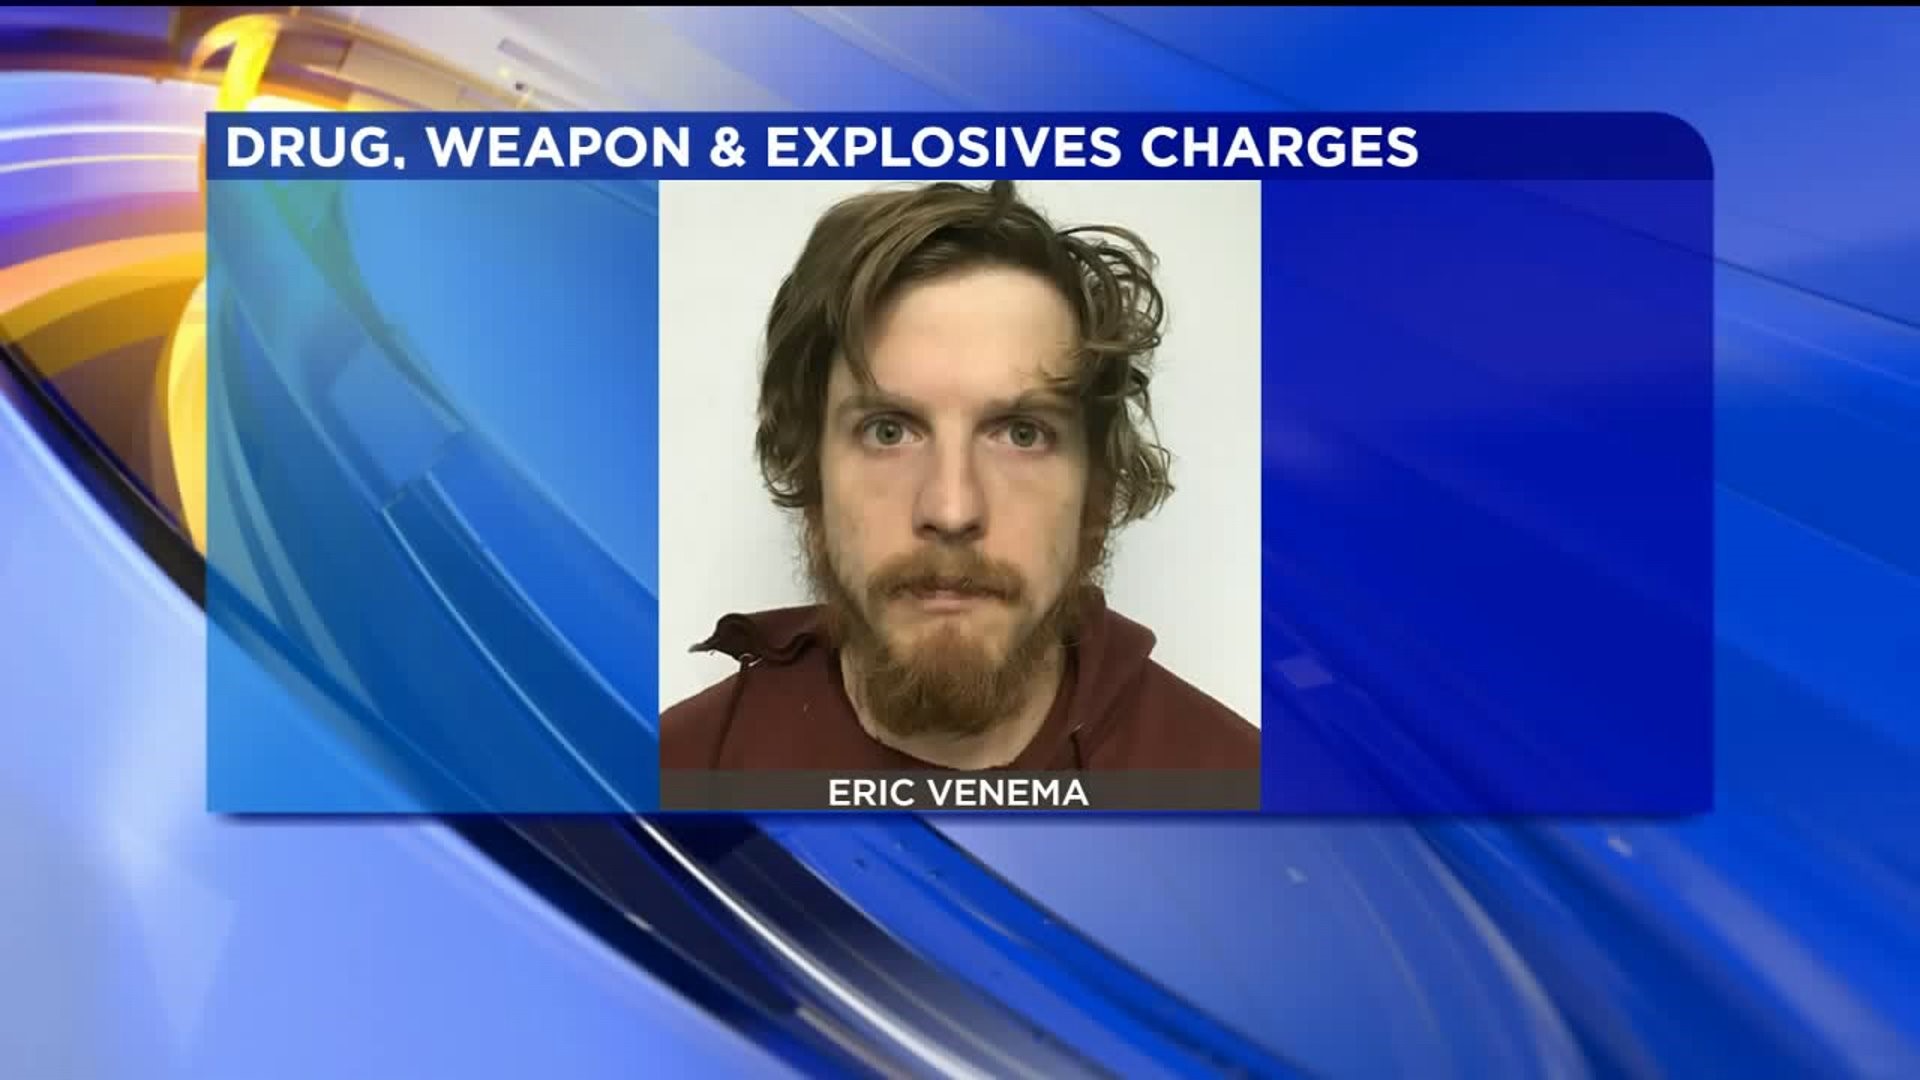 Man charged with making weapons of mass destruction after allegedly found with homemade explosive devices